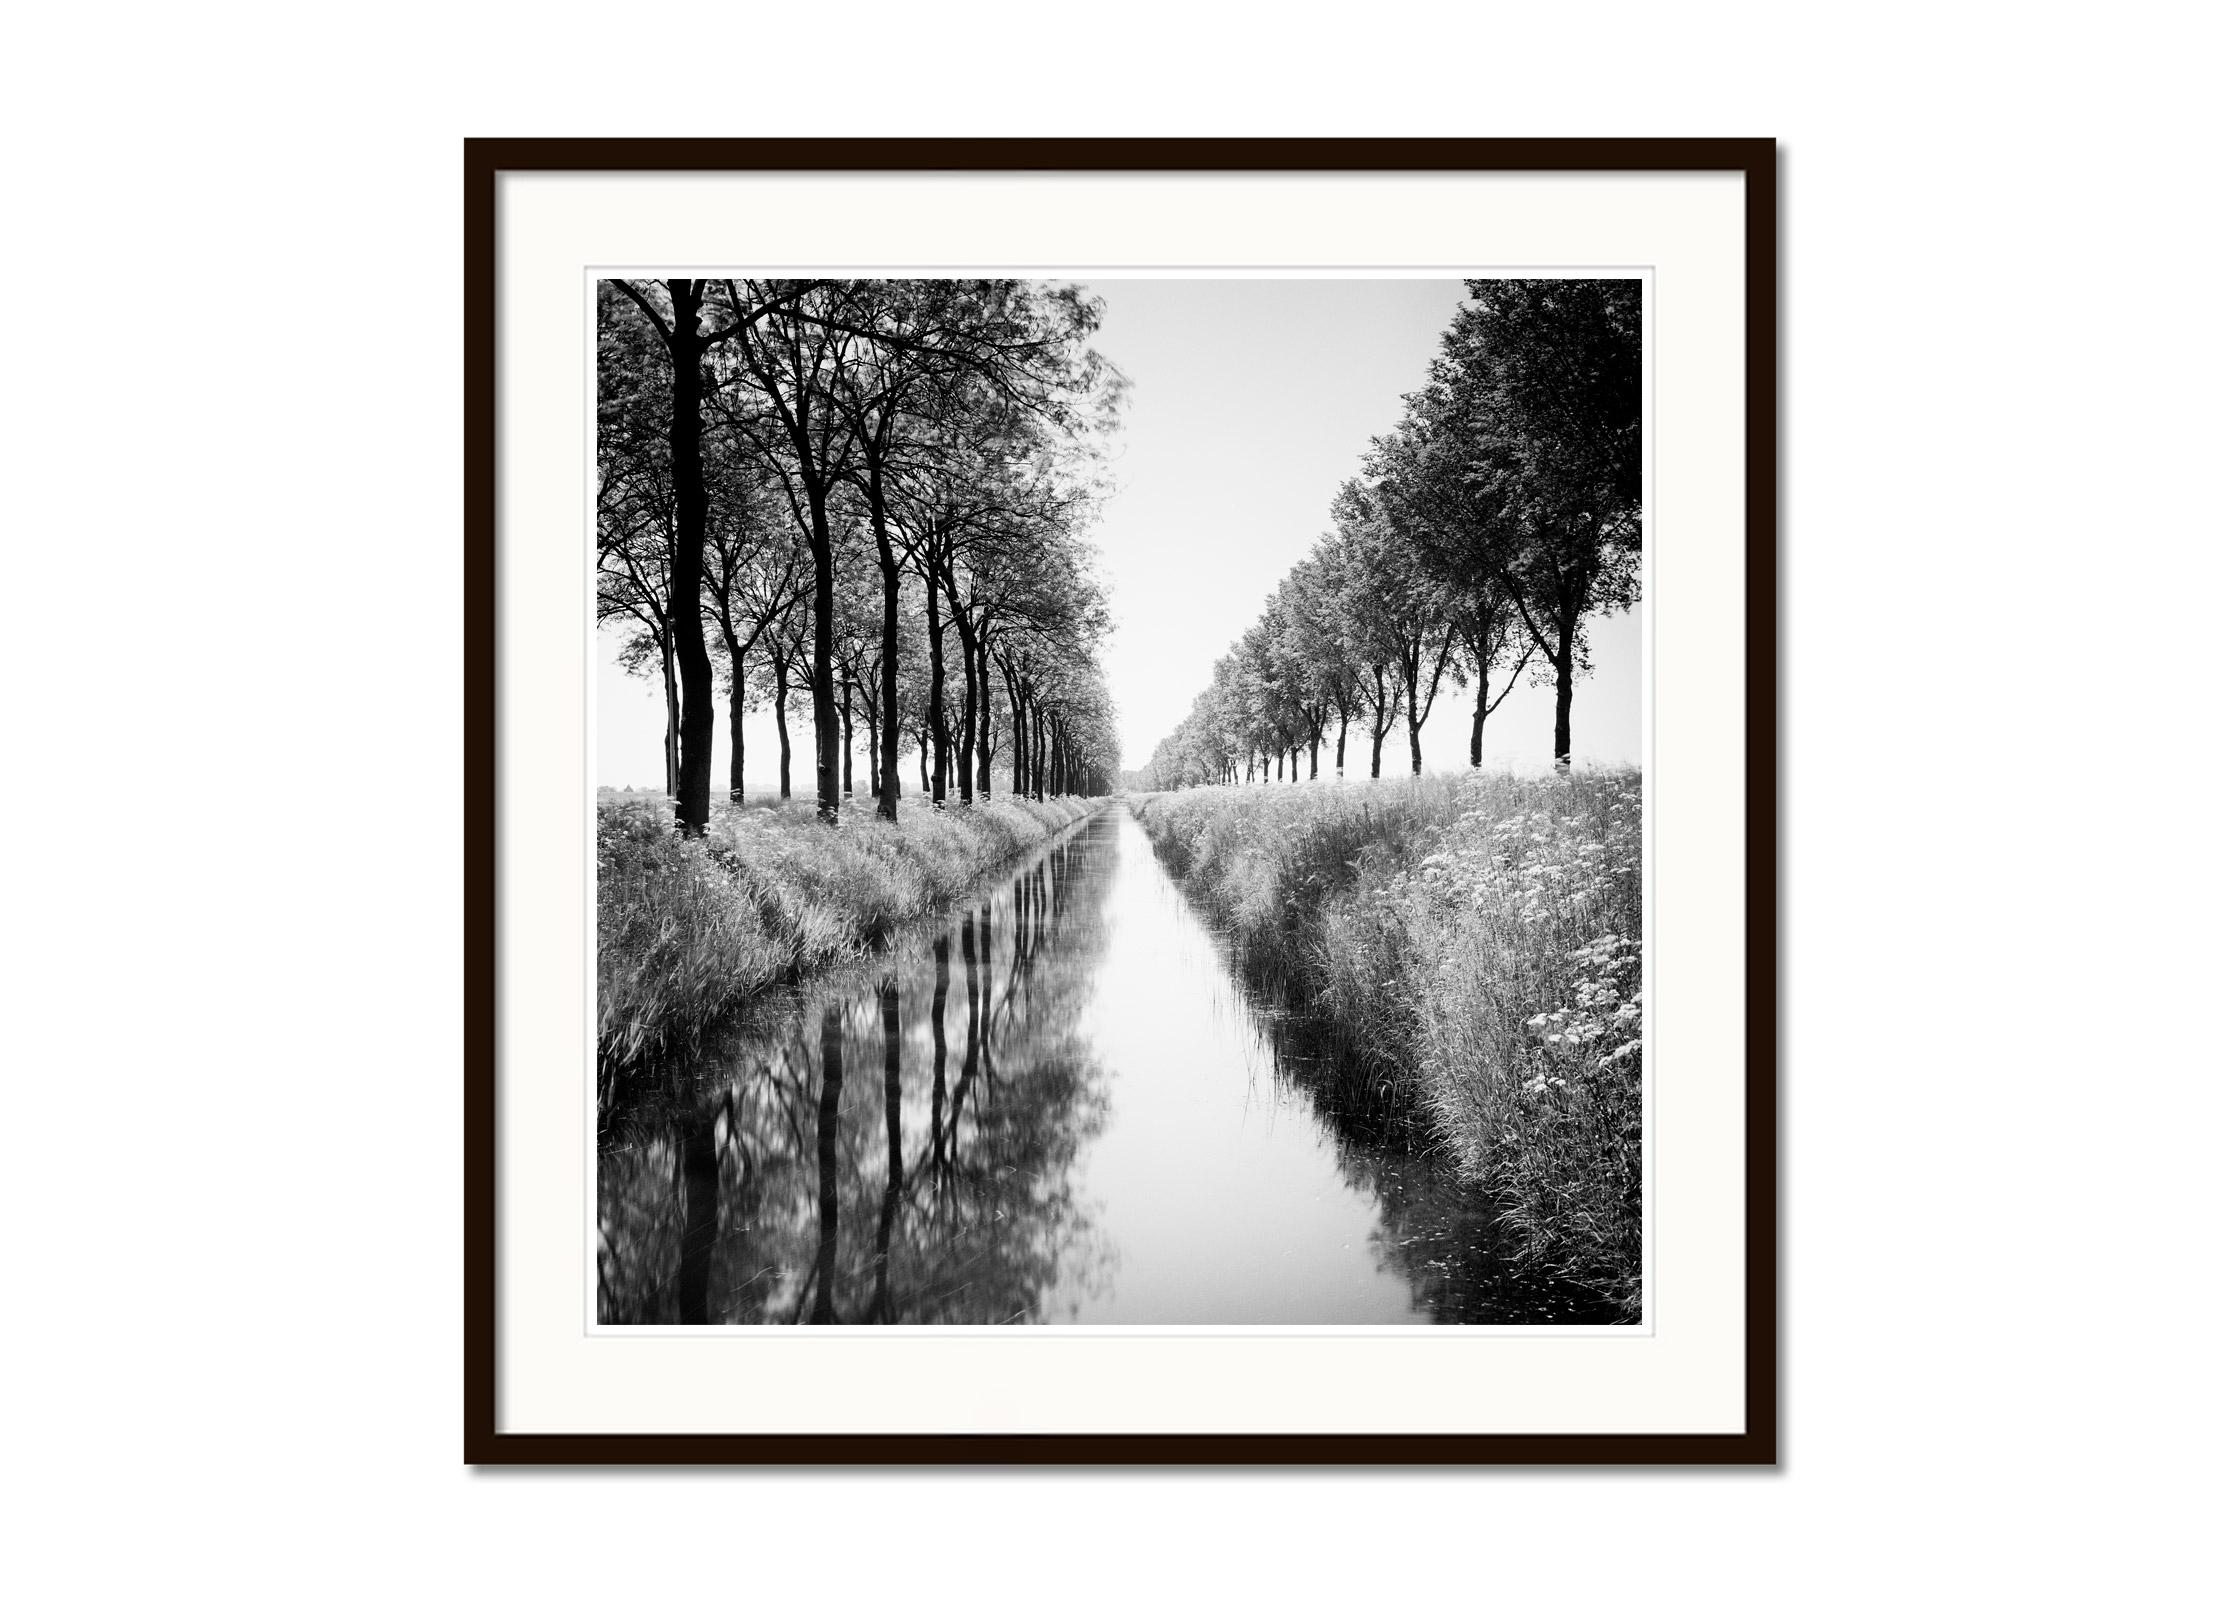 Black and White Fine Art Waterscape Photography - Avenue of trees by a water ditch with reflections in the calm water. Archival pigment ink print, edition of 5. Signed, titled, dated and numbered by artist. Certificate of authenticity included.